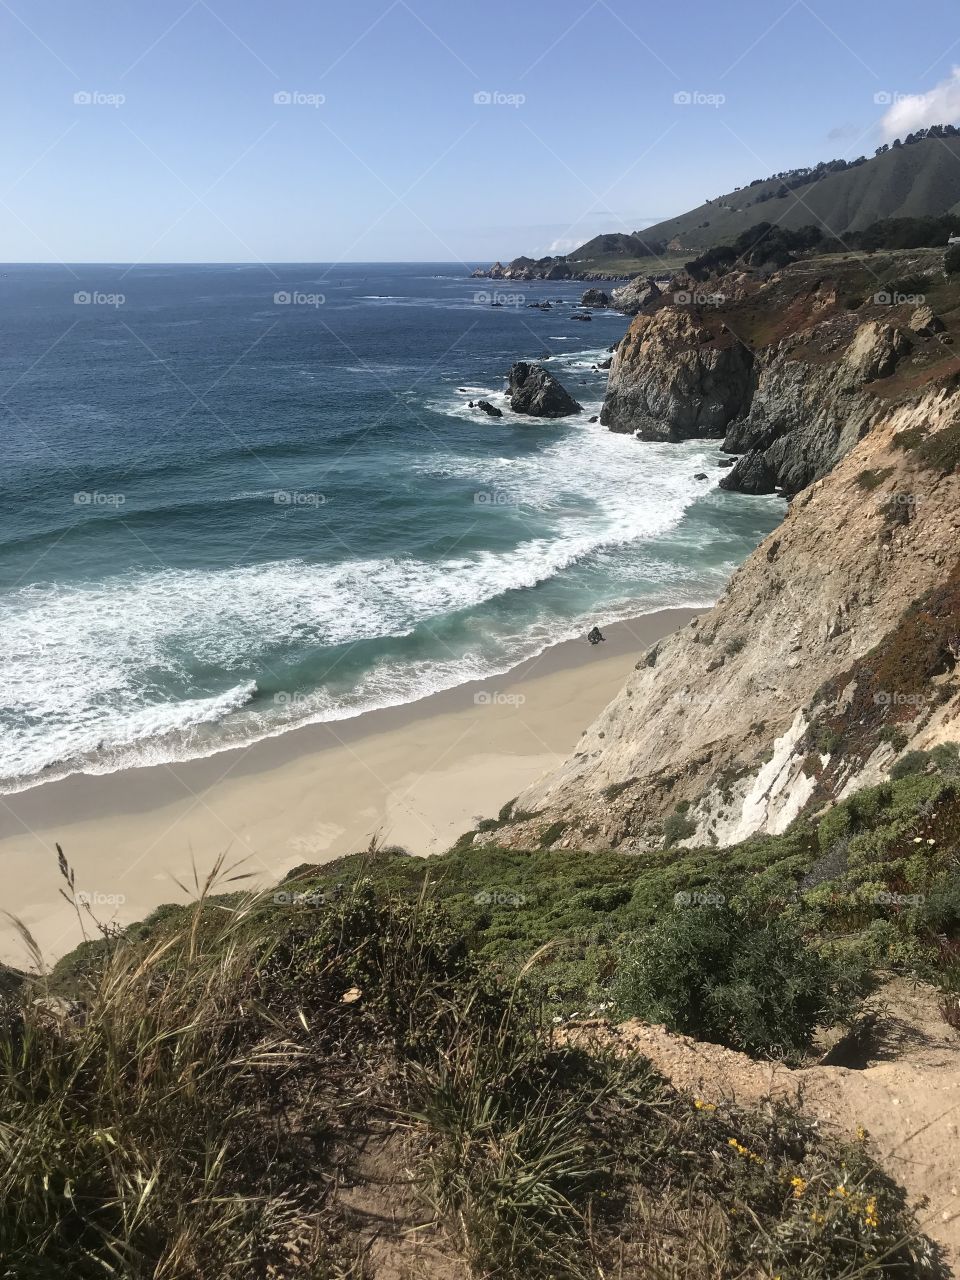 An escape from reality, time and space with a glance across the jagged cliffs and crashing waters of the California coastline. 